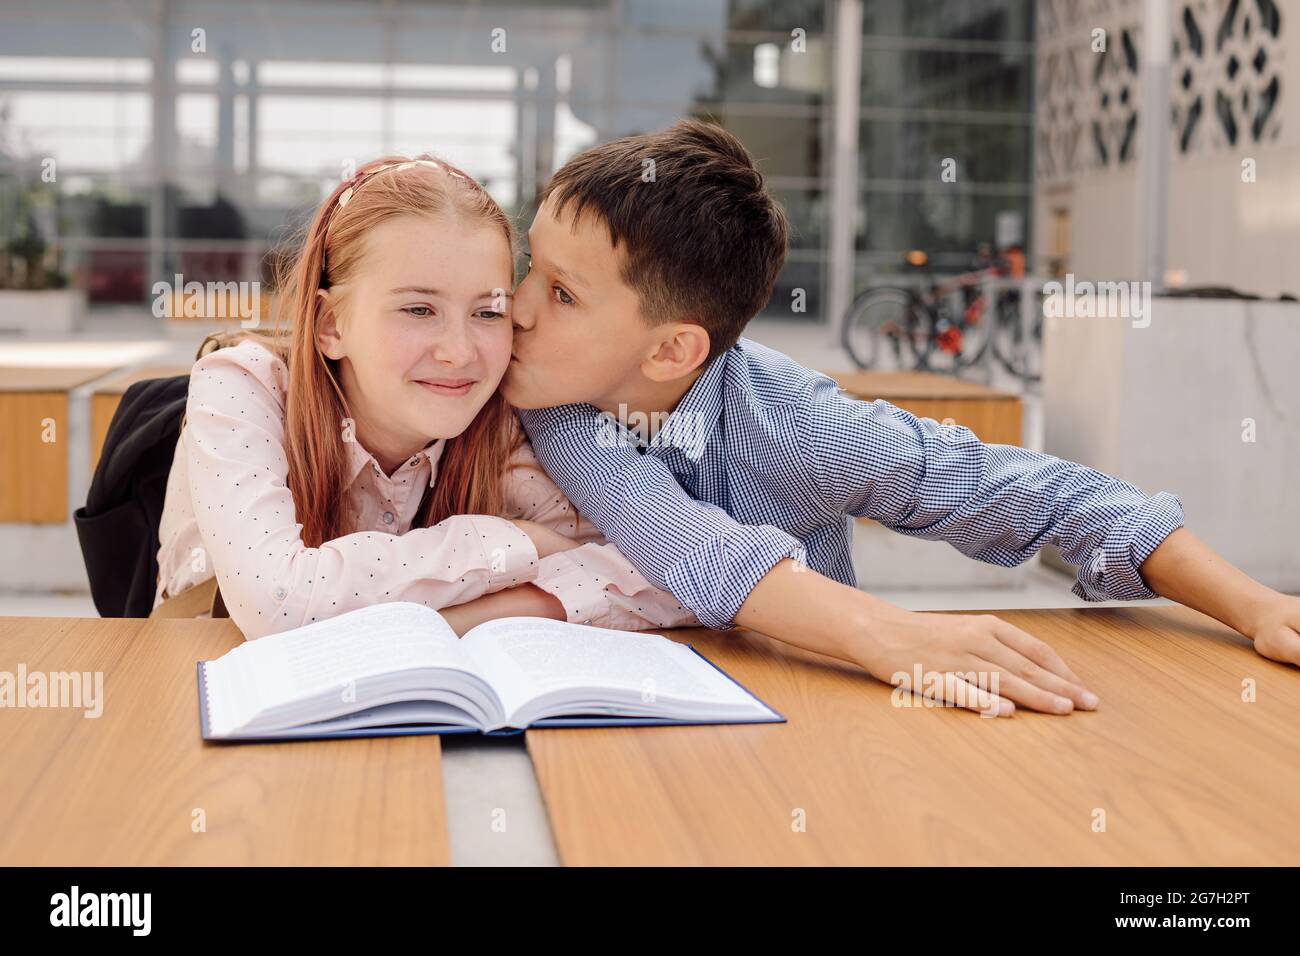 boy kisses girl in school yard. concept of first school love Stock Photo